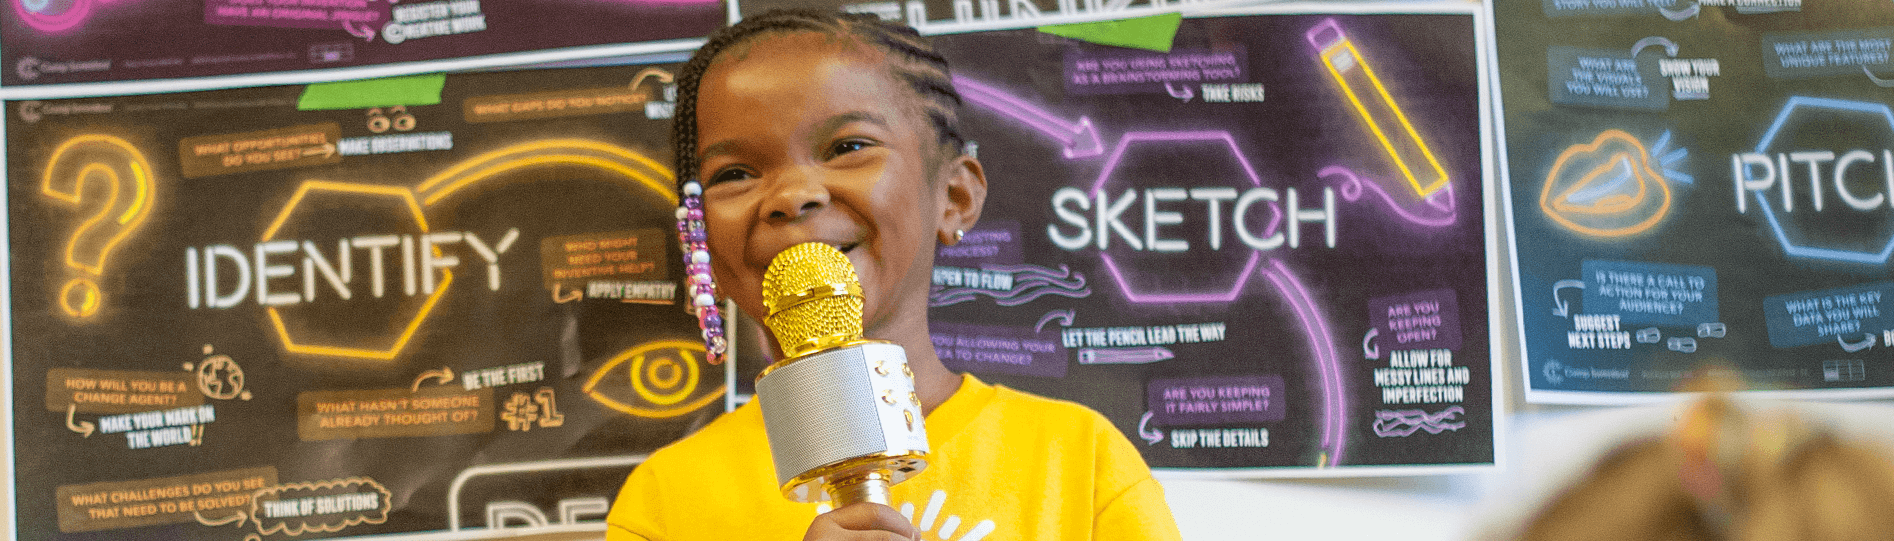 Young person holding a DIY microphone